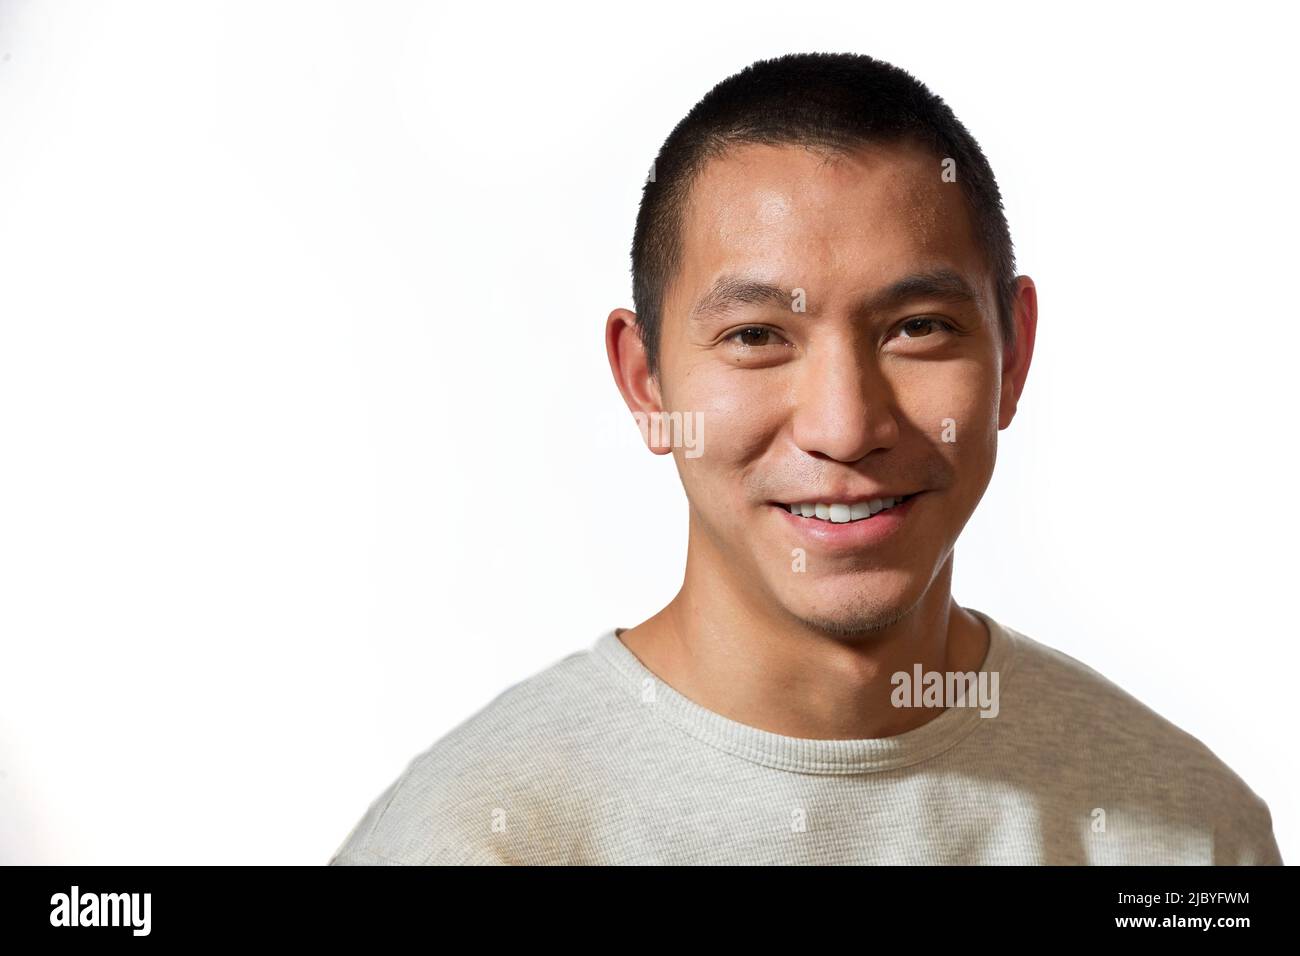 Portrait of young man of Asian descent looking at camera with smile Stock Photo